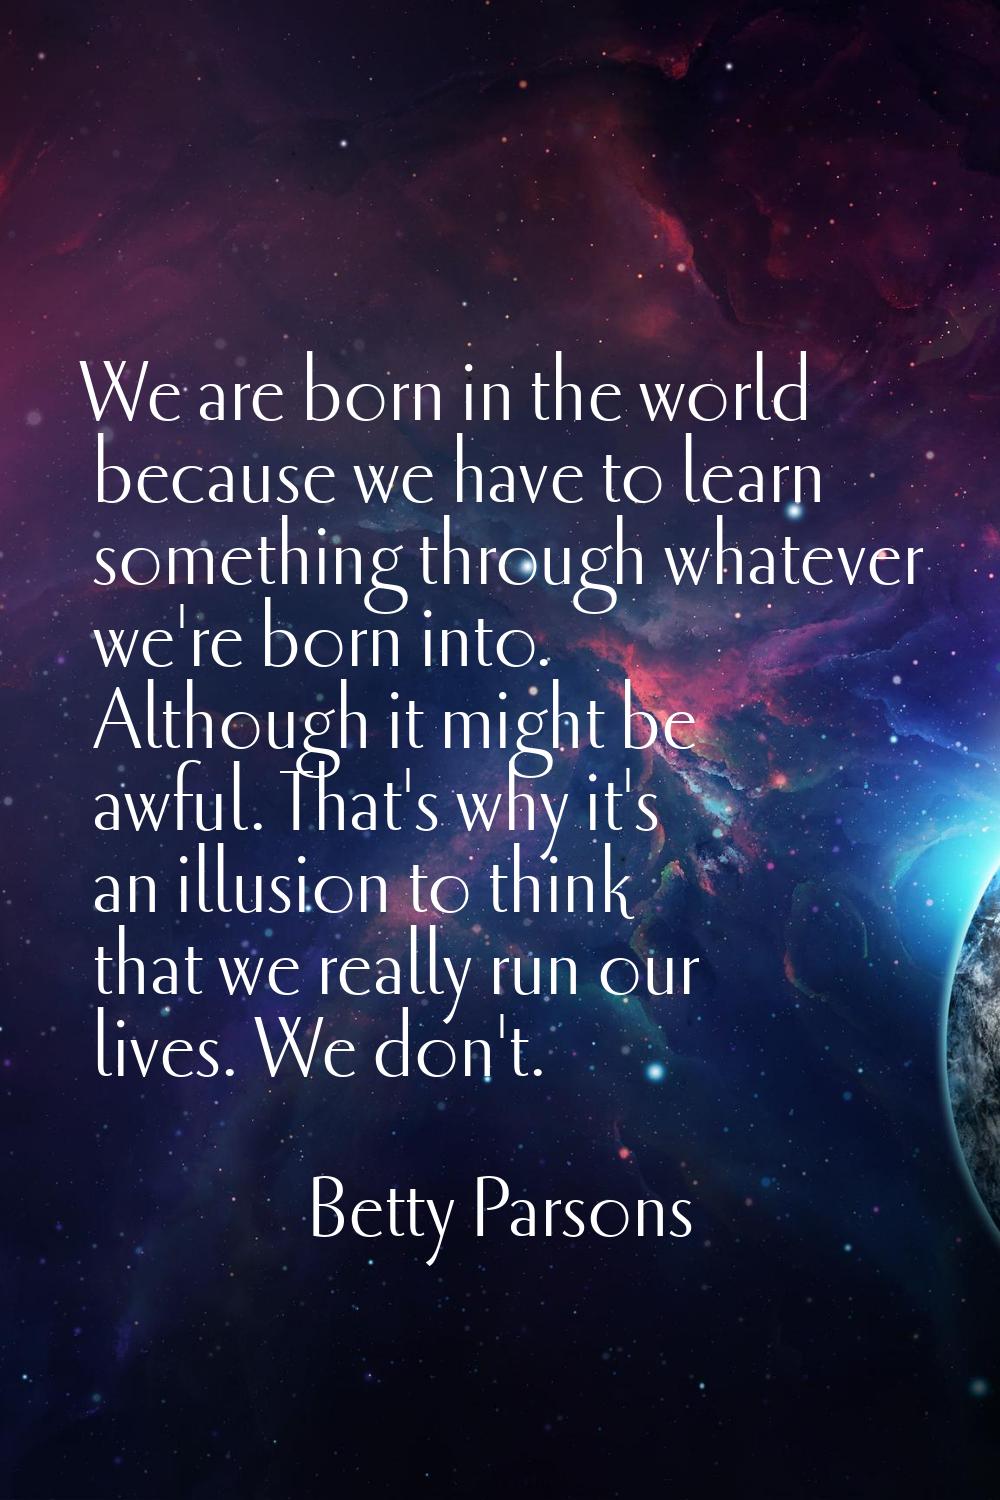 We are born in the world because we have to learn something through whatever we're born into. Altho